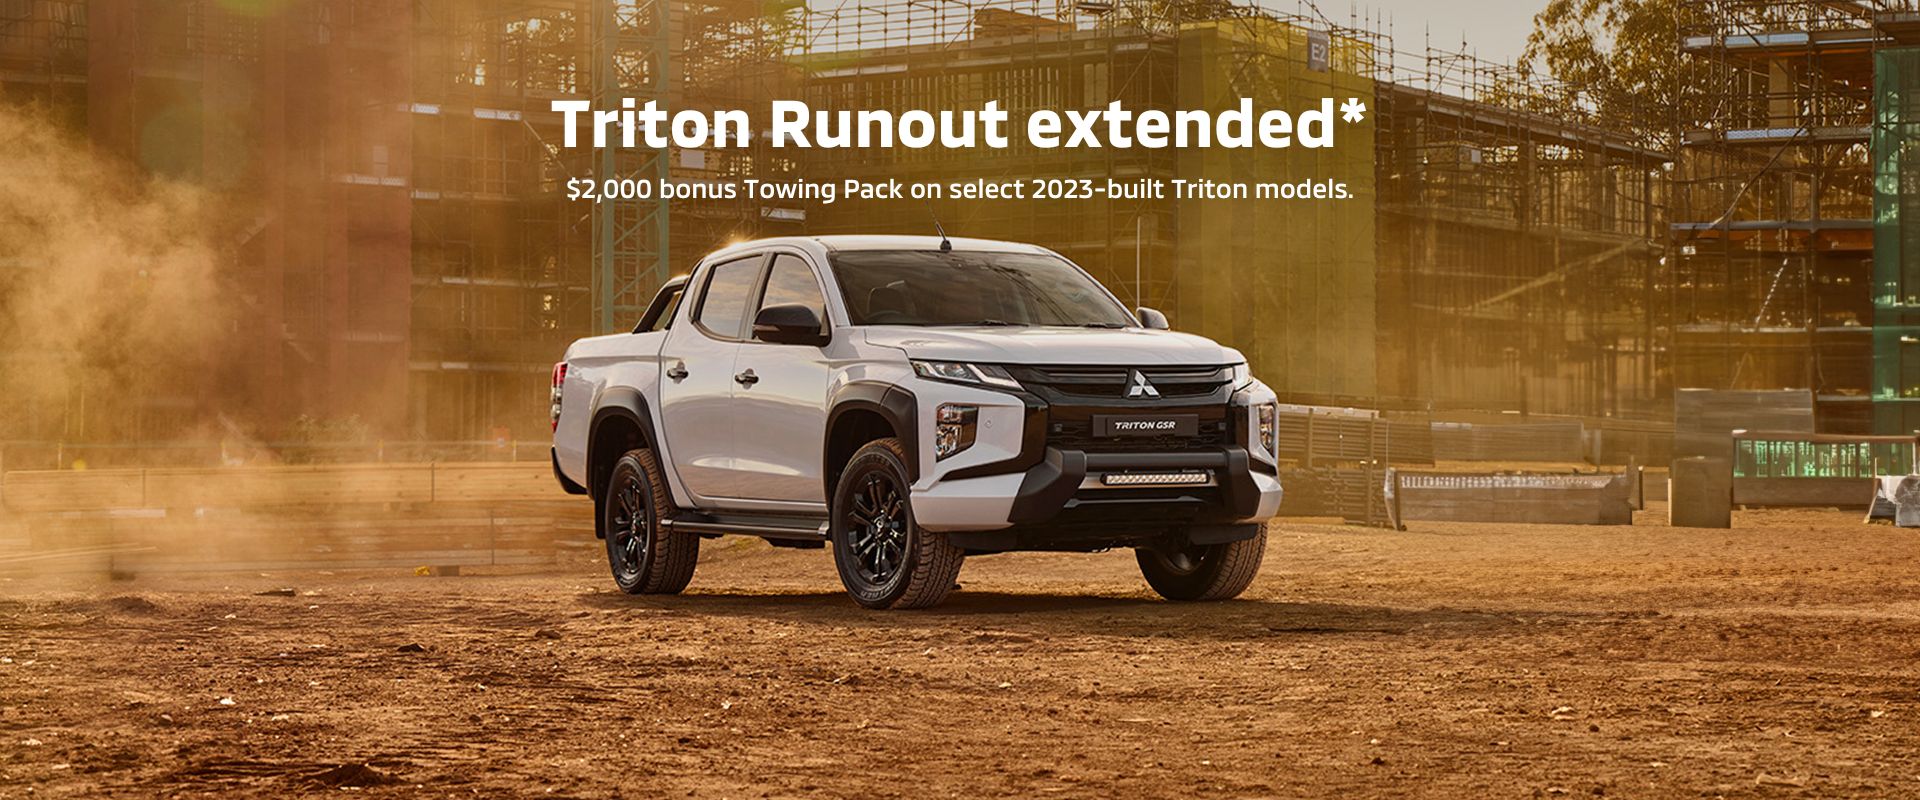 Triton Runout extended $2000 bonus Towing Pack on select 2023 built Triton models.